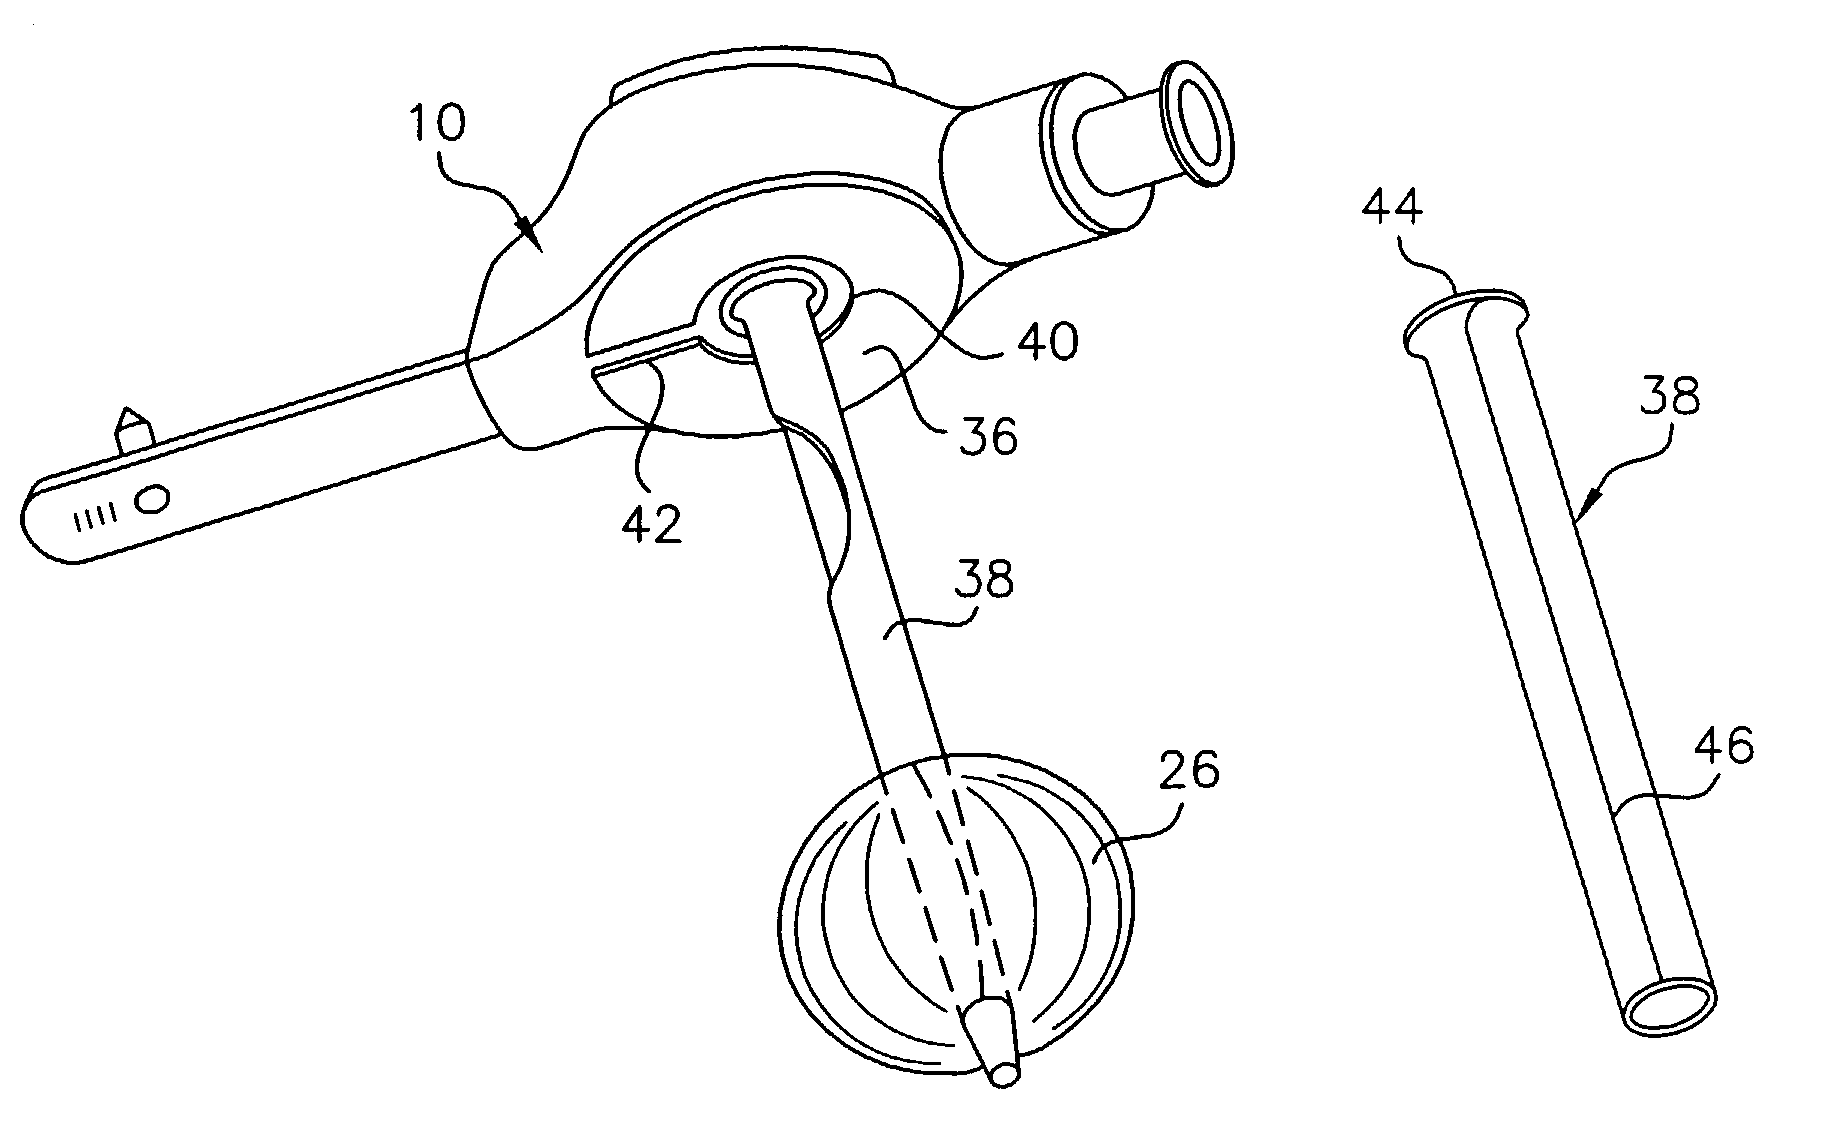 Low profile combination device for gastrostomy or jejunostomy applications having anti-granuloma formation characteristics